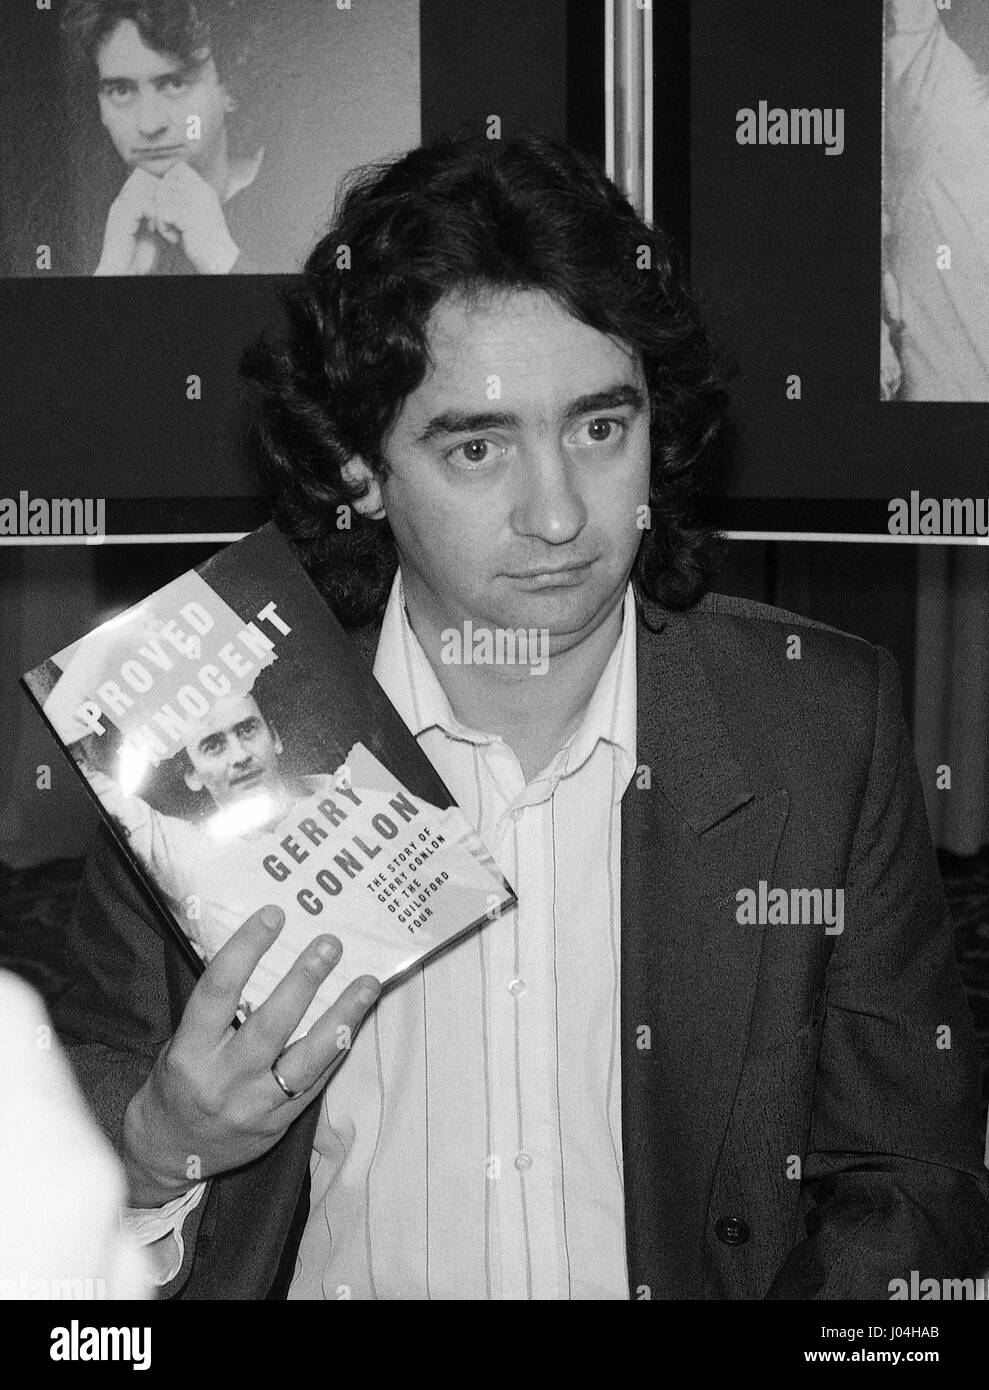 Gerry Conlon, one of the Guildford Four wrongly convicted for the Guildford pub bombings, attends a press conference to launch his book Proved Innocent in London, England on June 11, 1990. Stock Photo